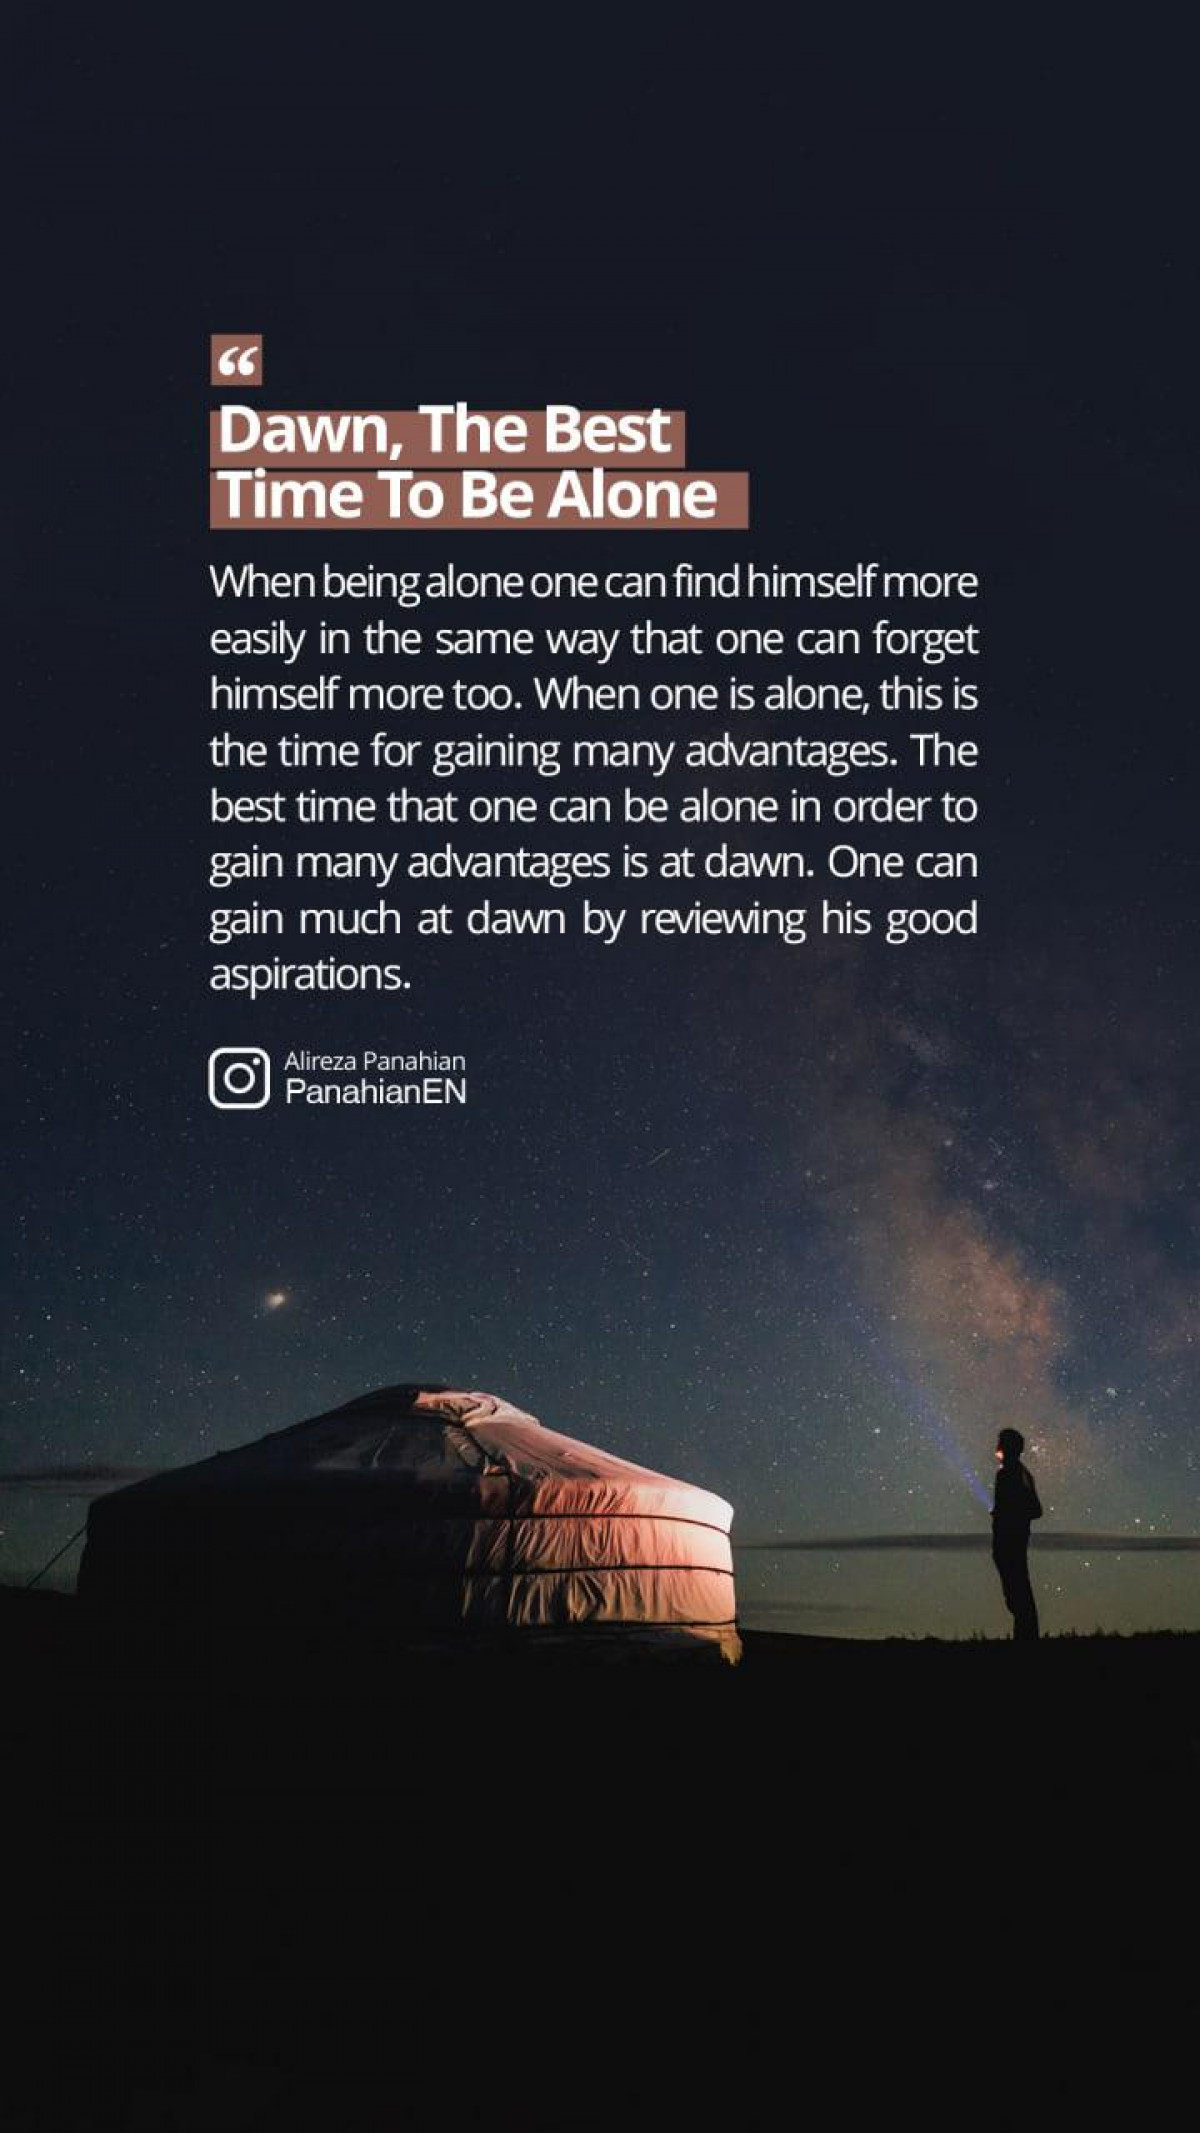 Dawn, the best time to be alone